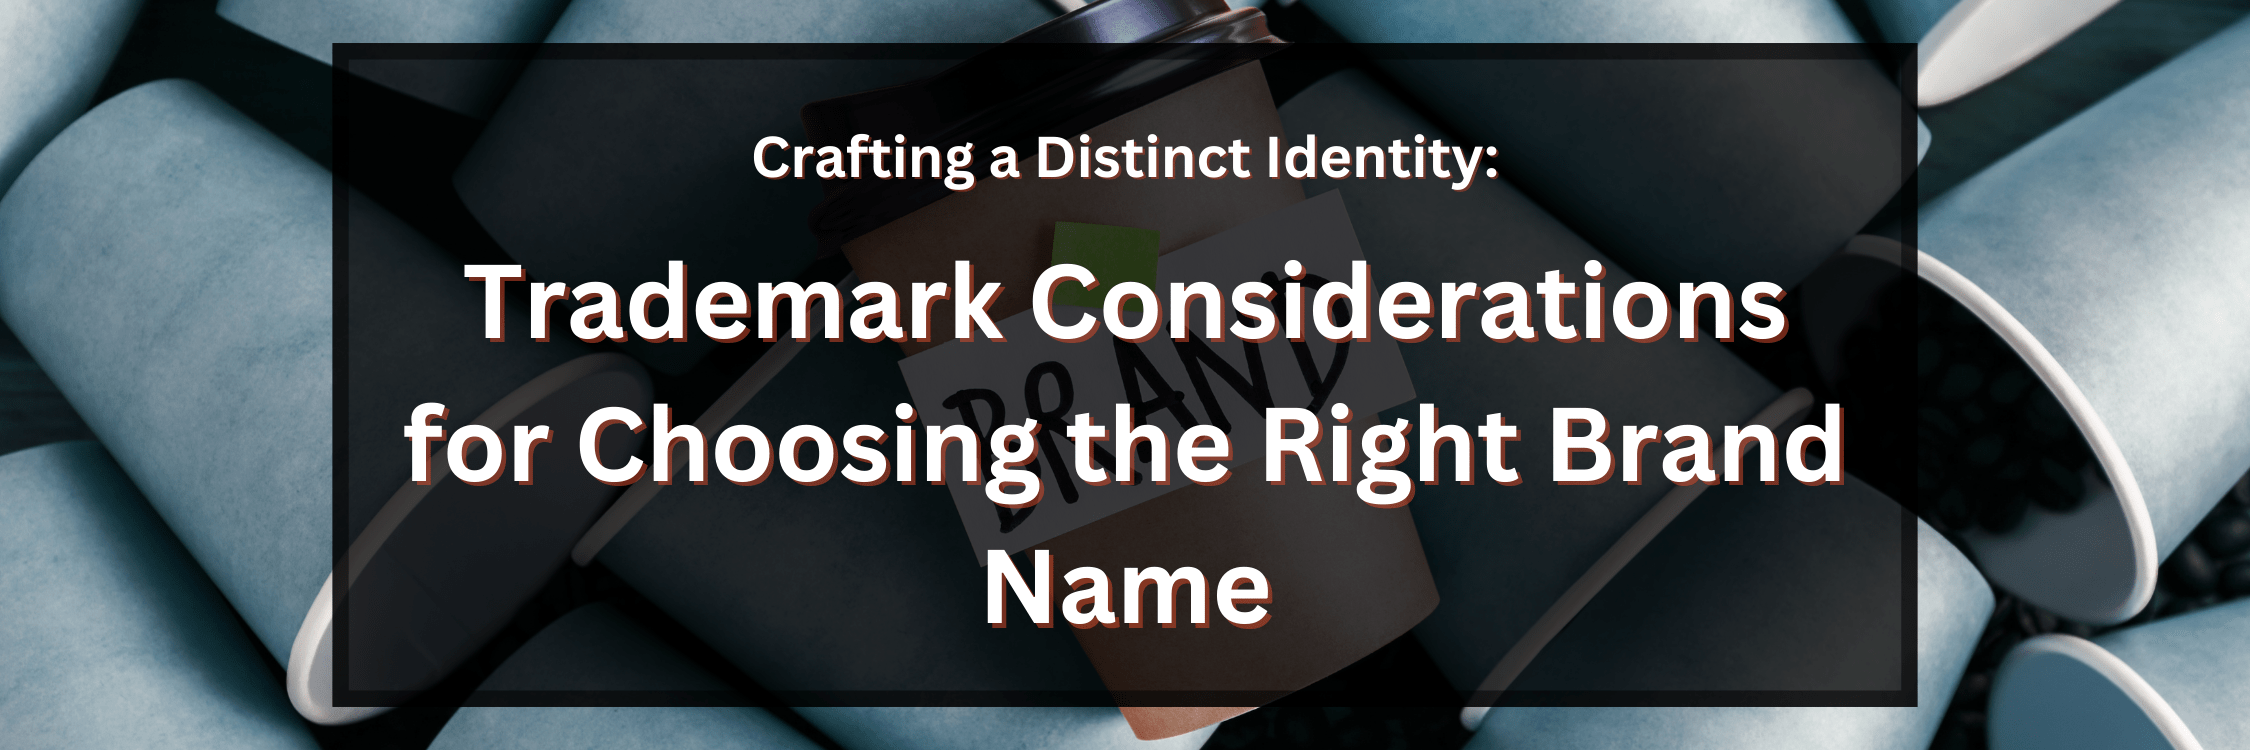 Crafting a Distinct Identity: Trademark Considerations for Choosing the Right Brand Name